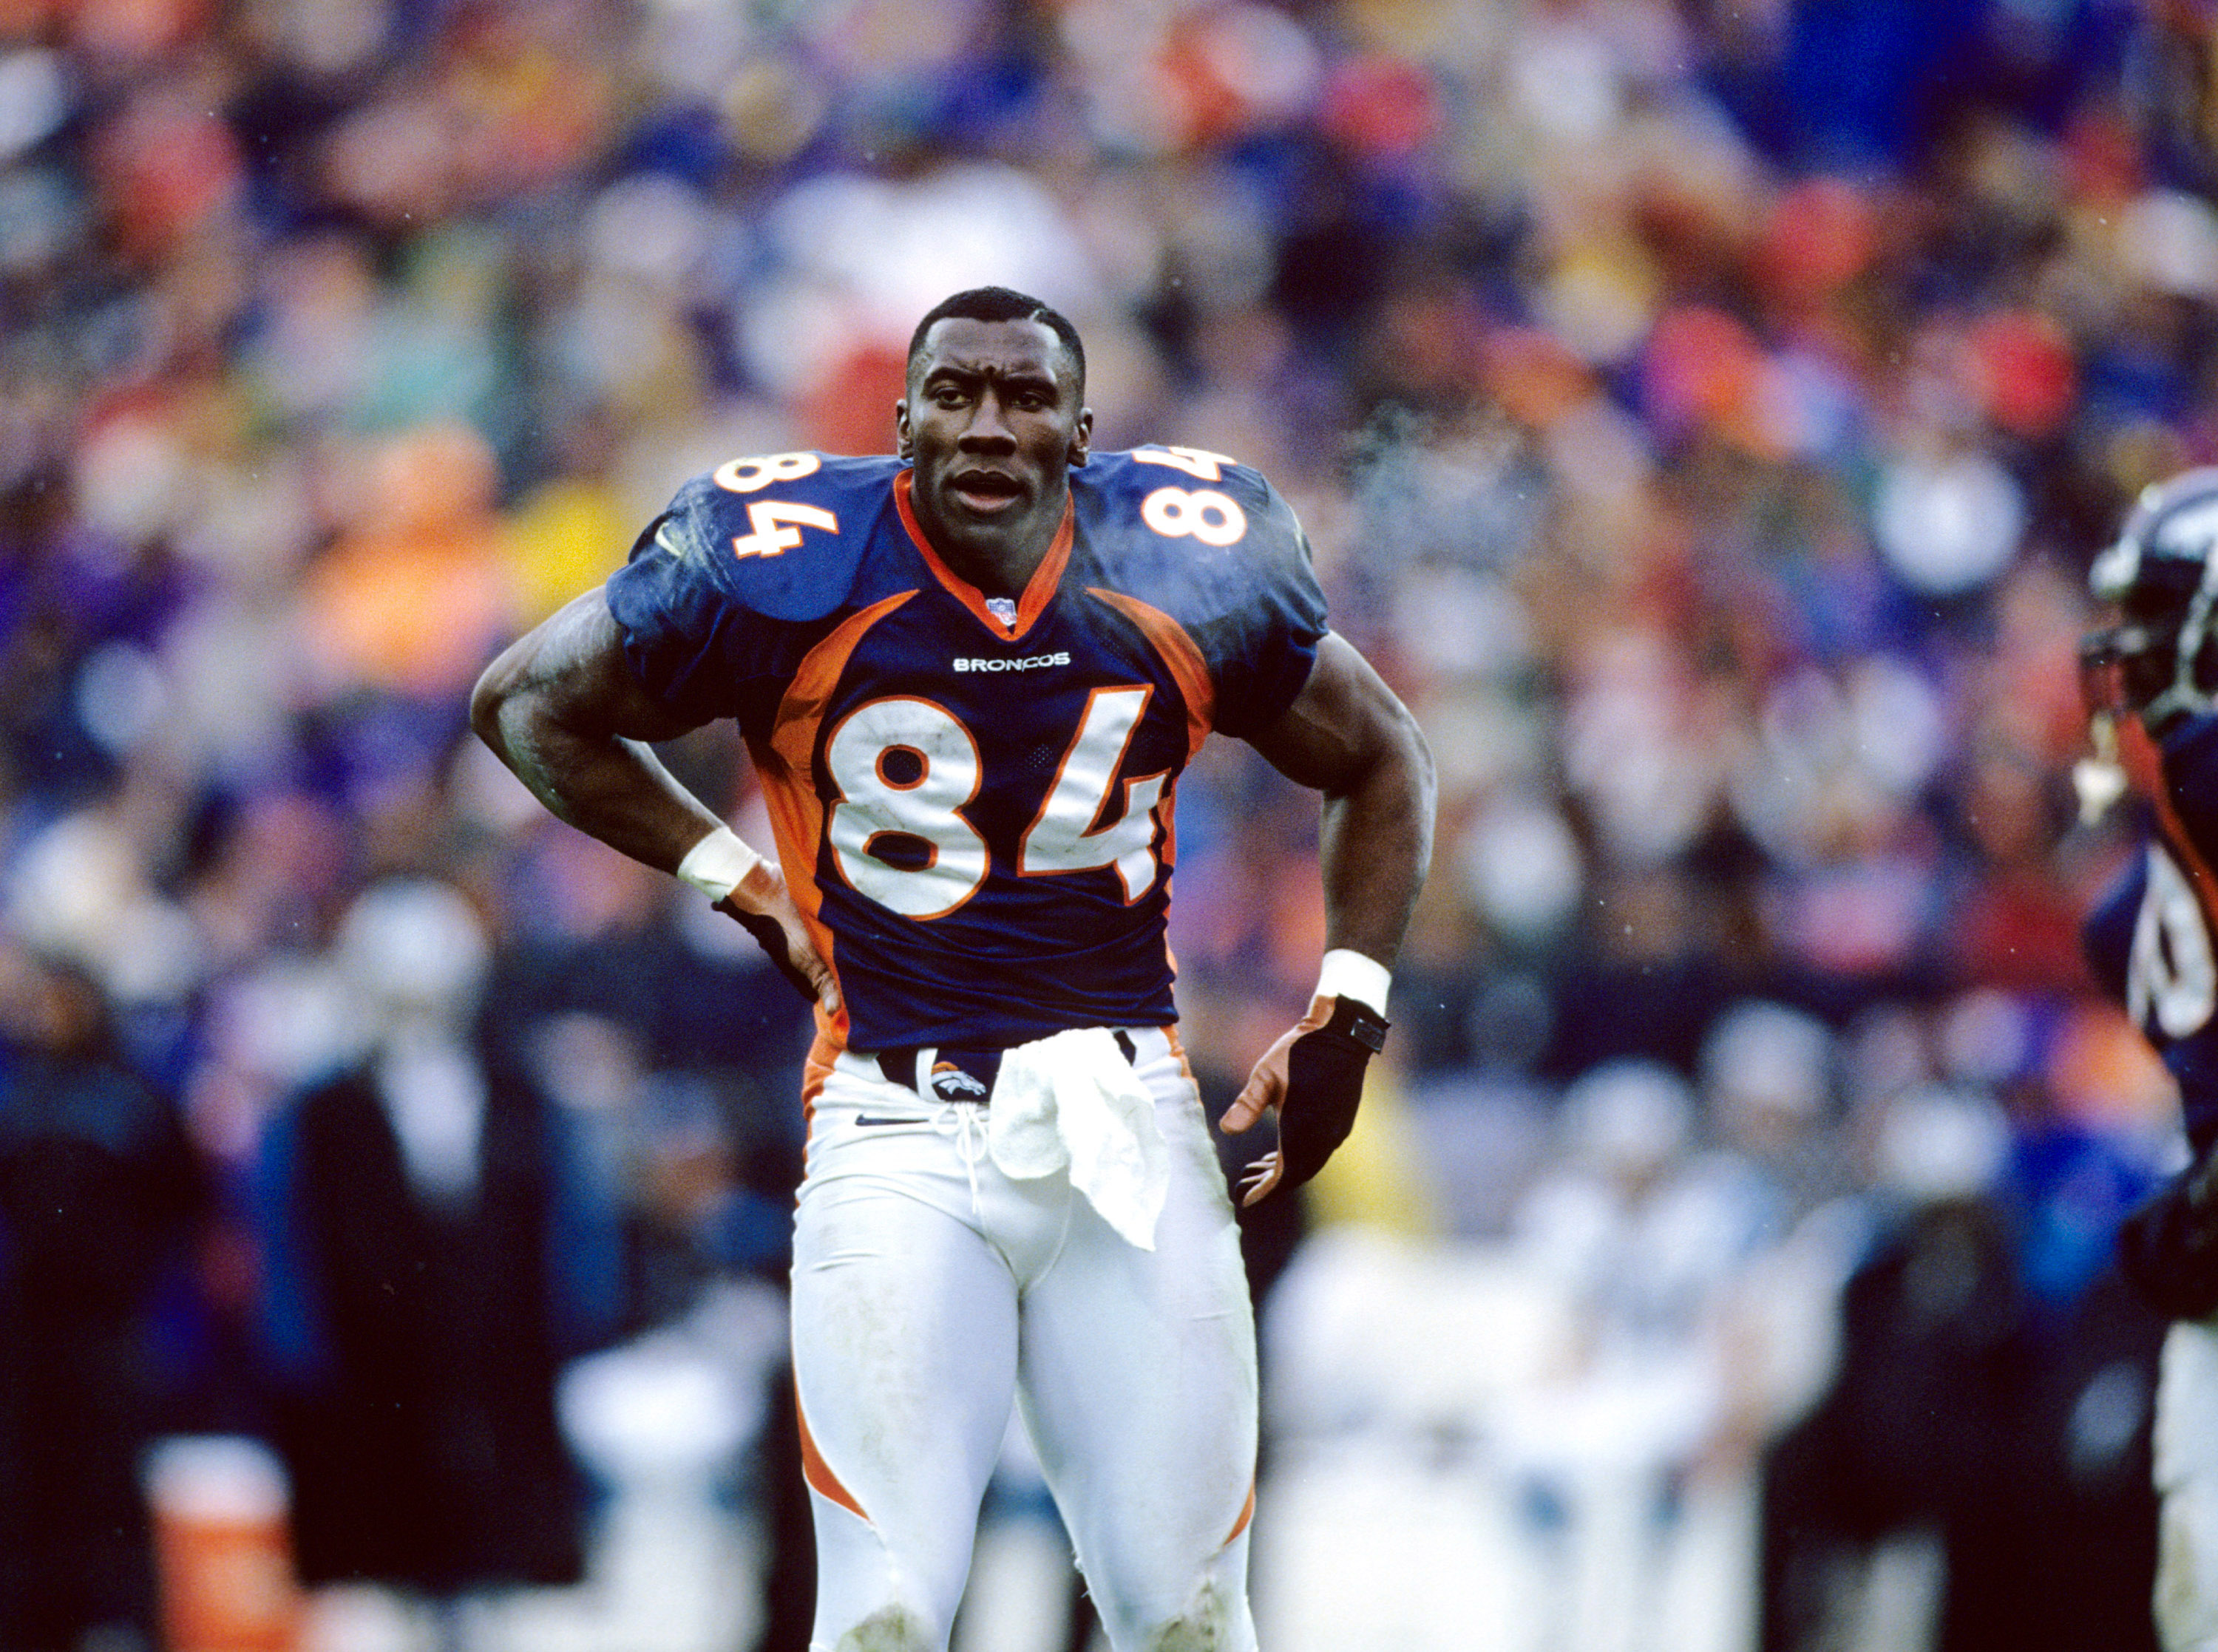 Denver Broncos tight end Shannon Sharpe on the field during a game